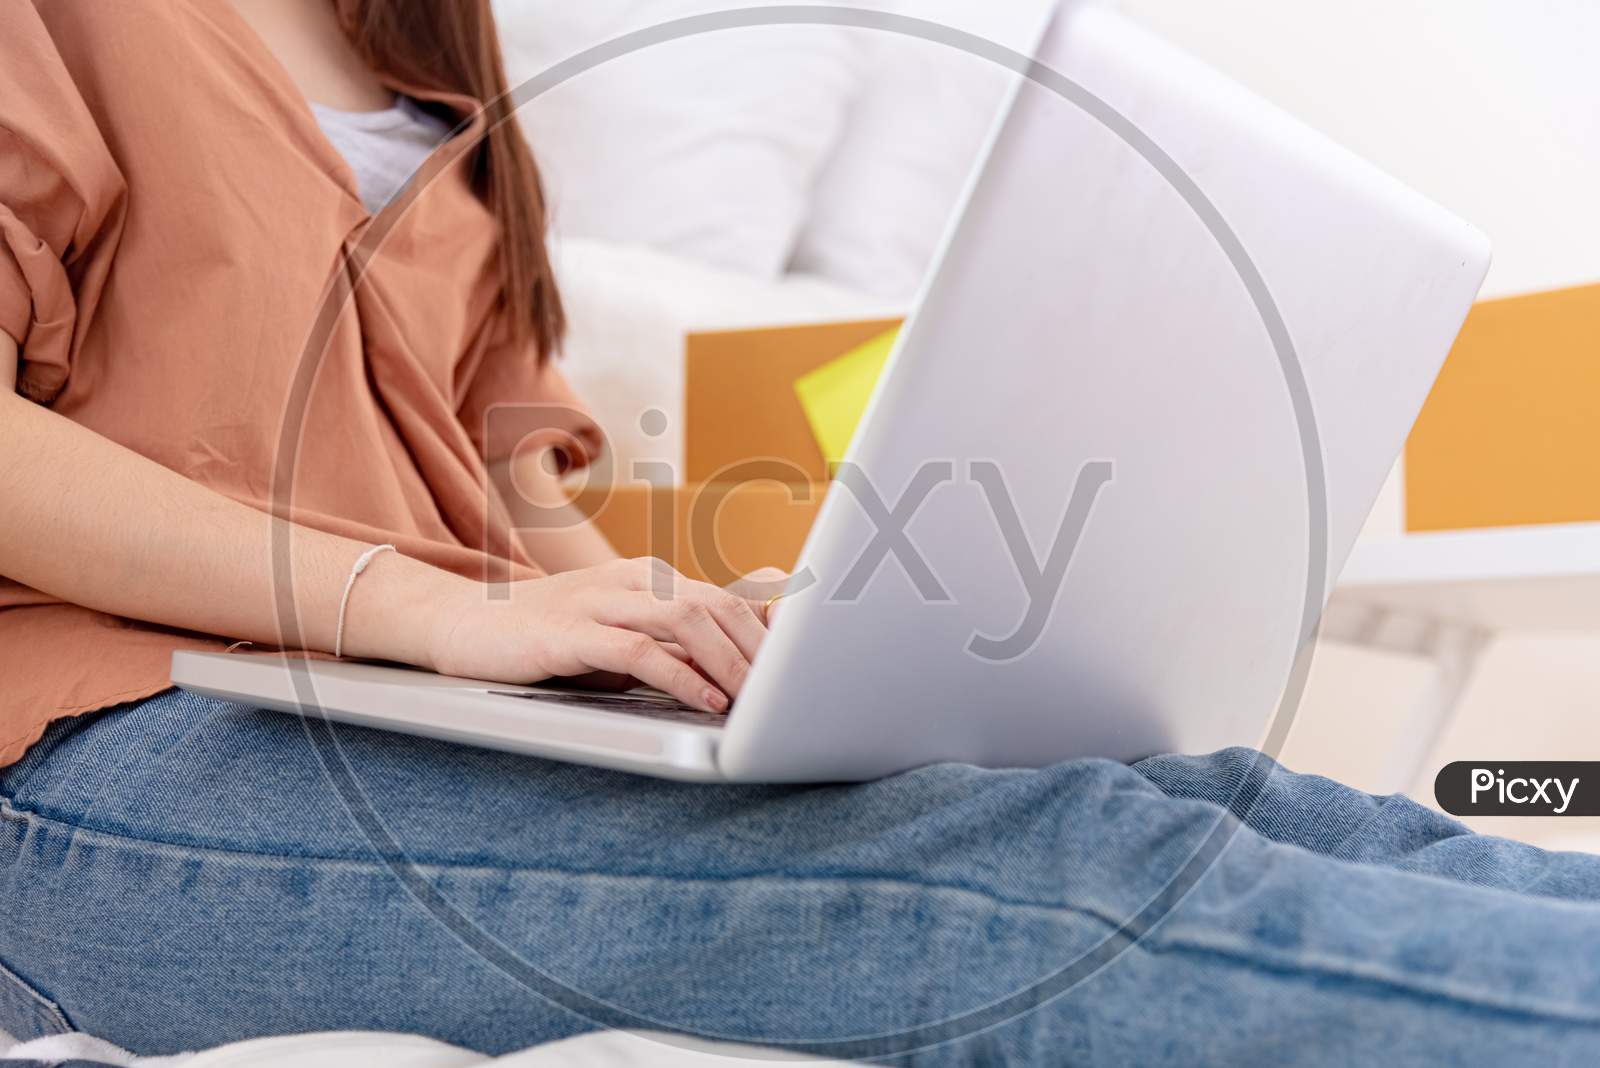 Closeup Of Laptop Using By Woman For Online Shopping Delivery Business At Home. Girl Typing On Keyboard By Hand. People Lifestyle And Occupation Concept. Entrepreneur Work From Home And Shop Owner